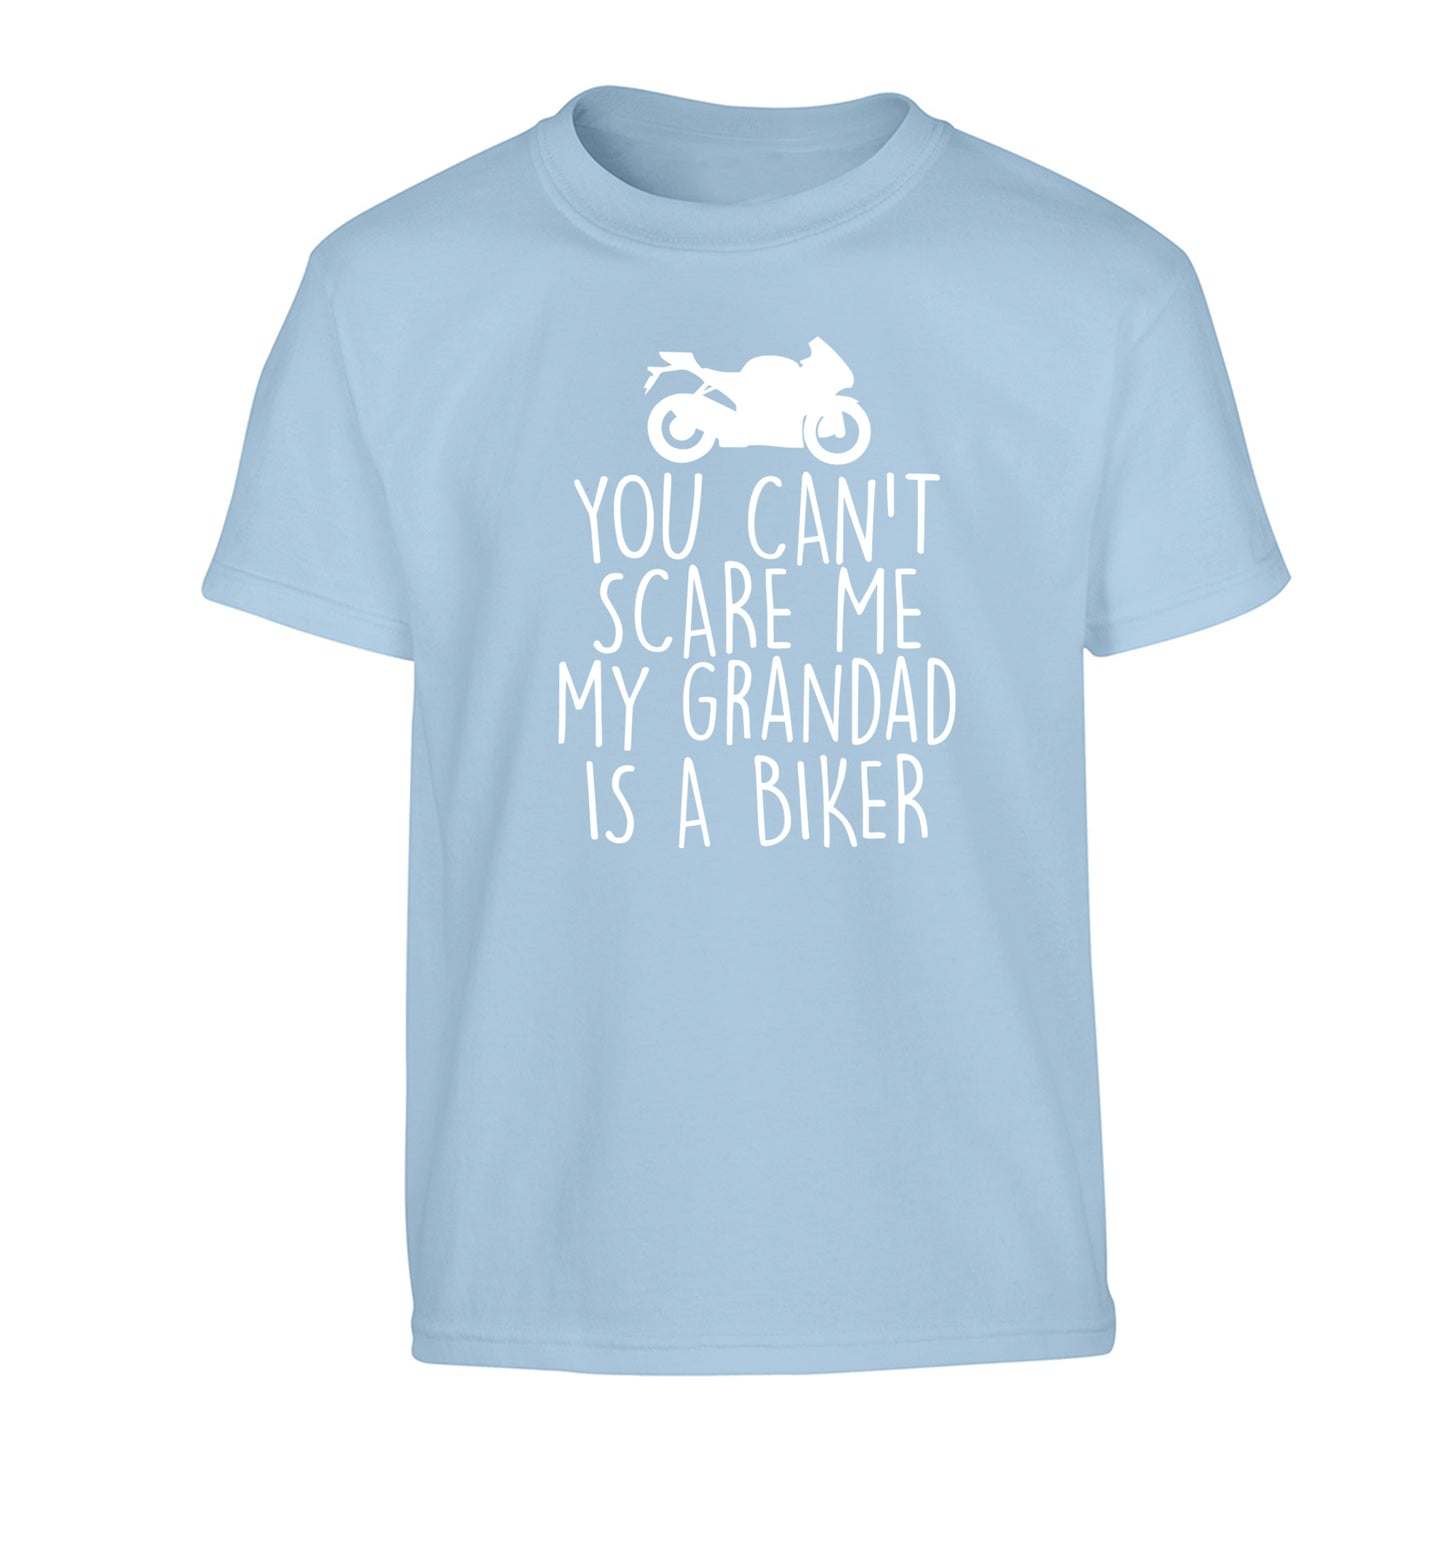 You can't scare me my grandad is a biker Children's light blue Tshirt 12-13 Years